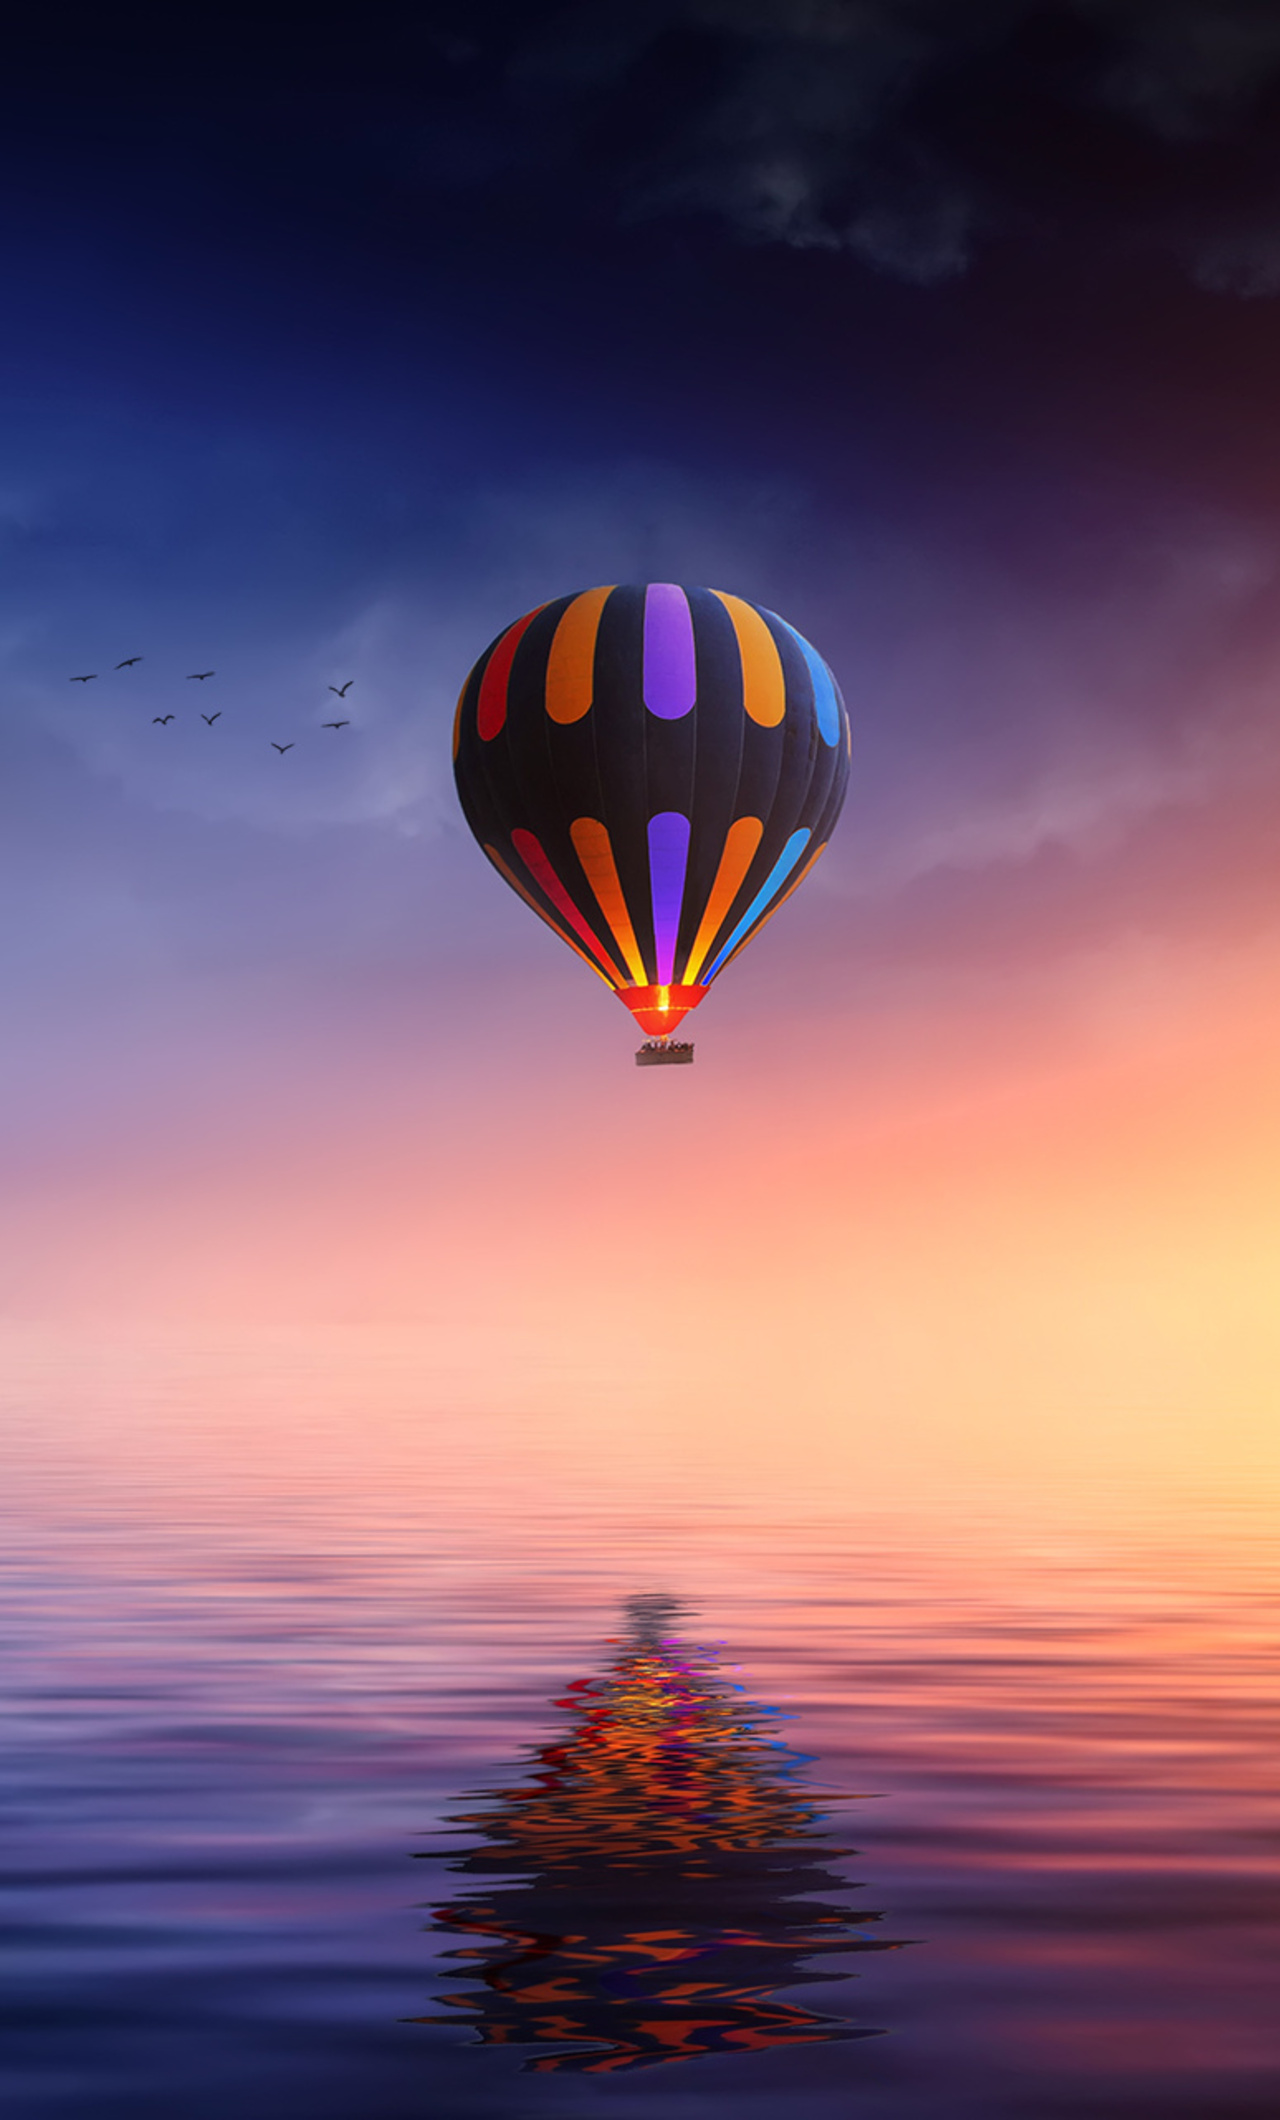 Red and Blue Hot Air Balloon Floating on Air on Body of Water during Night  Time  Free Stock Photo